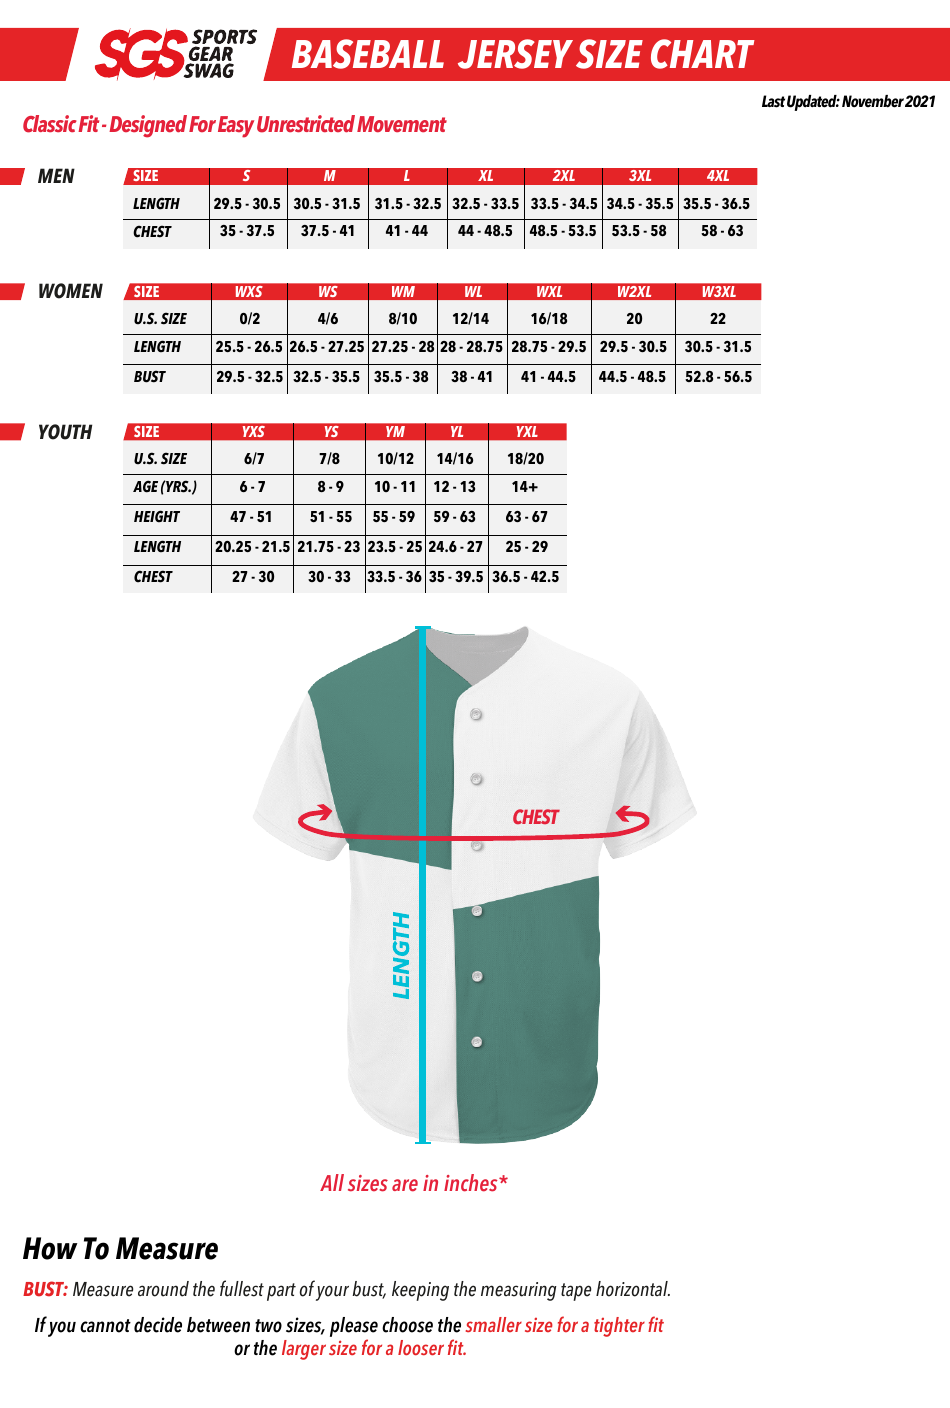 A comprehensive baseball jersey size chart presented by Sgs - your go-to resource for finding the right fit. This visual chart displays a variety of sizes available in baseball jerseys depending on your preferences and body measurements. Use this accurate and reliable size guide to make sure you order the perfect baseball jersey that suits your unique needs.